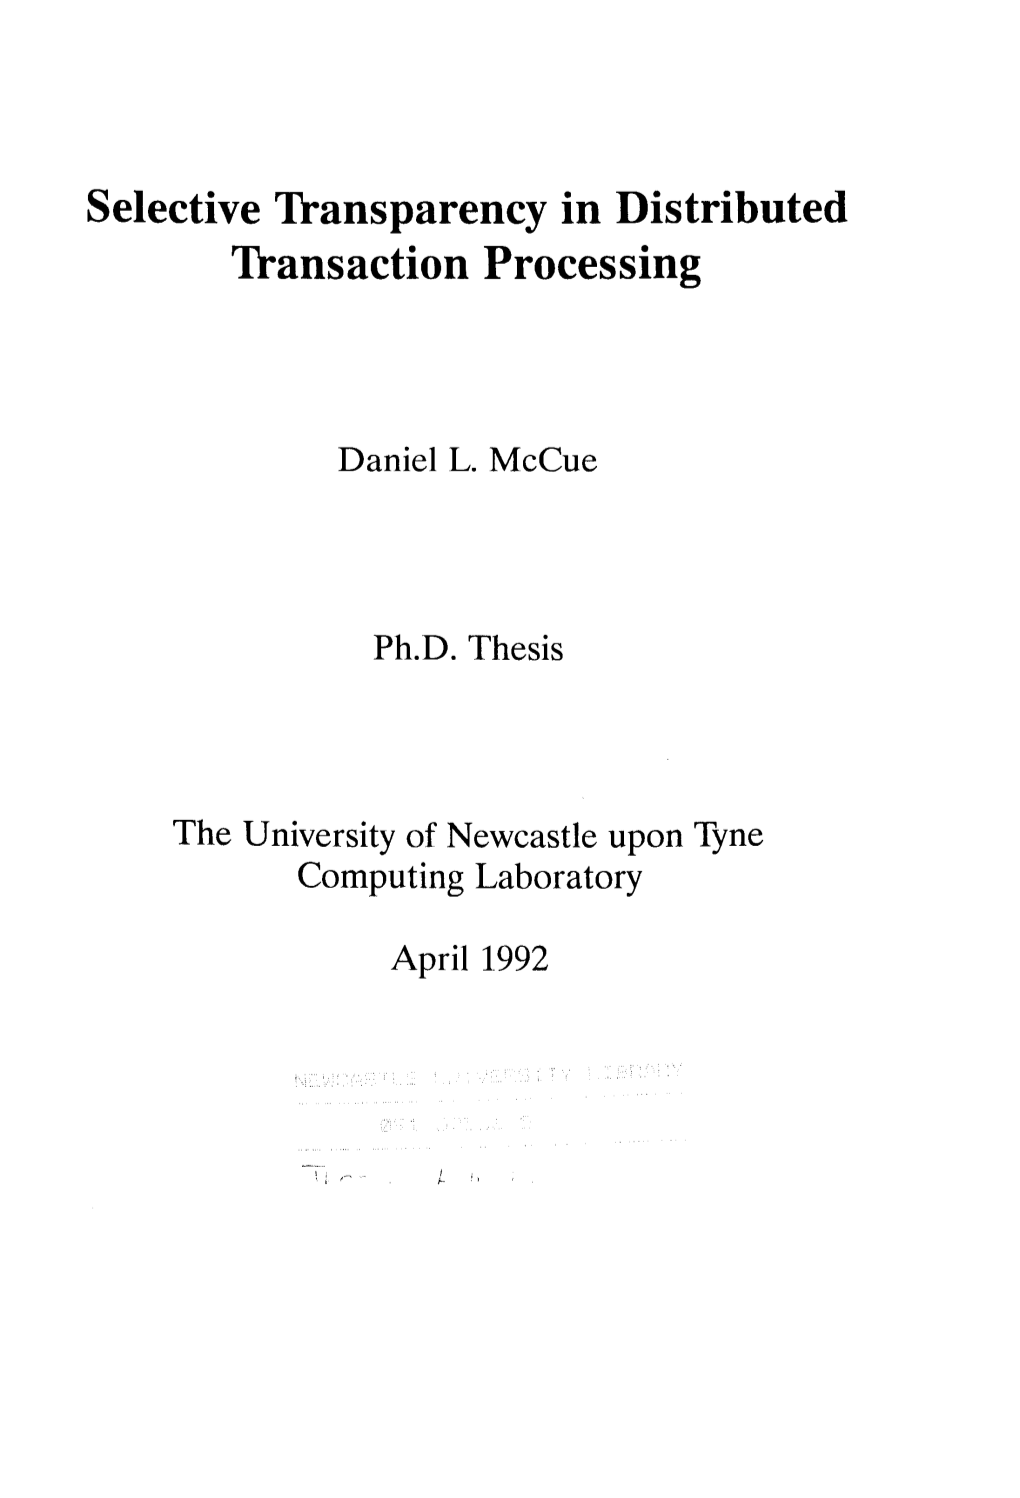 Selective Transparency in Distributed Transaction Processing